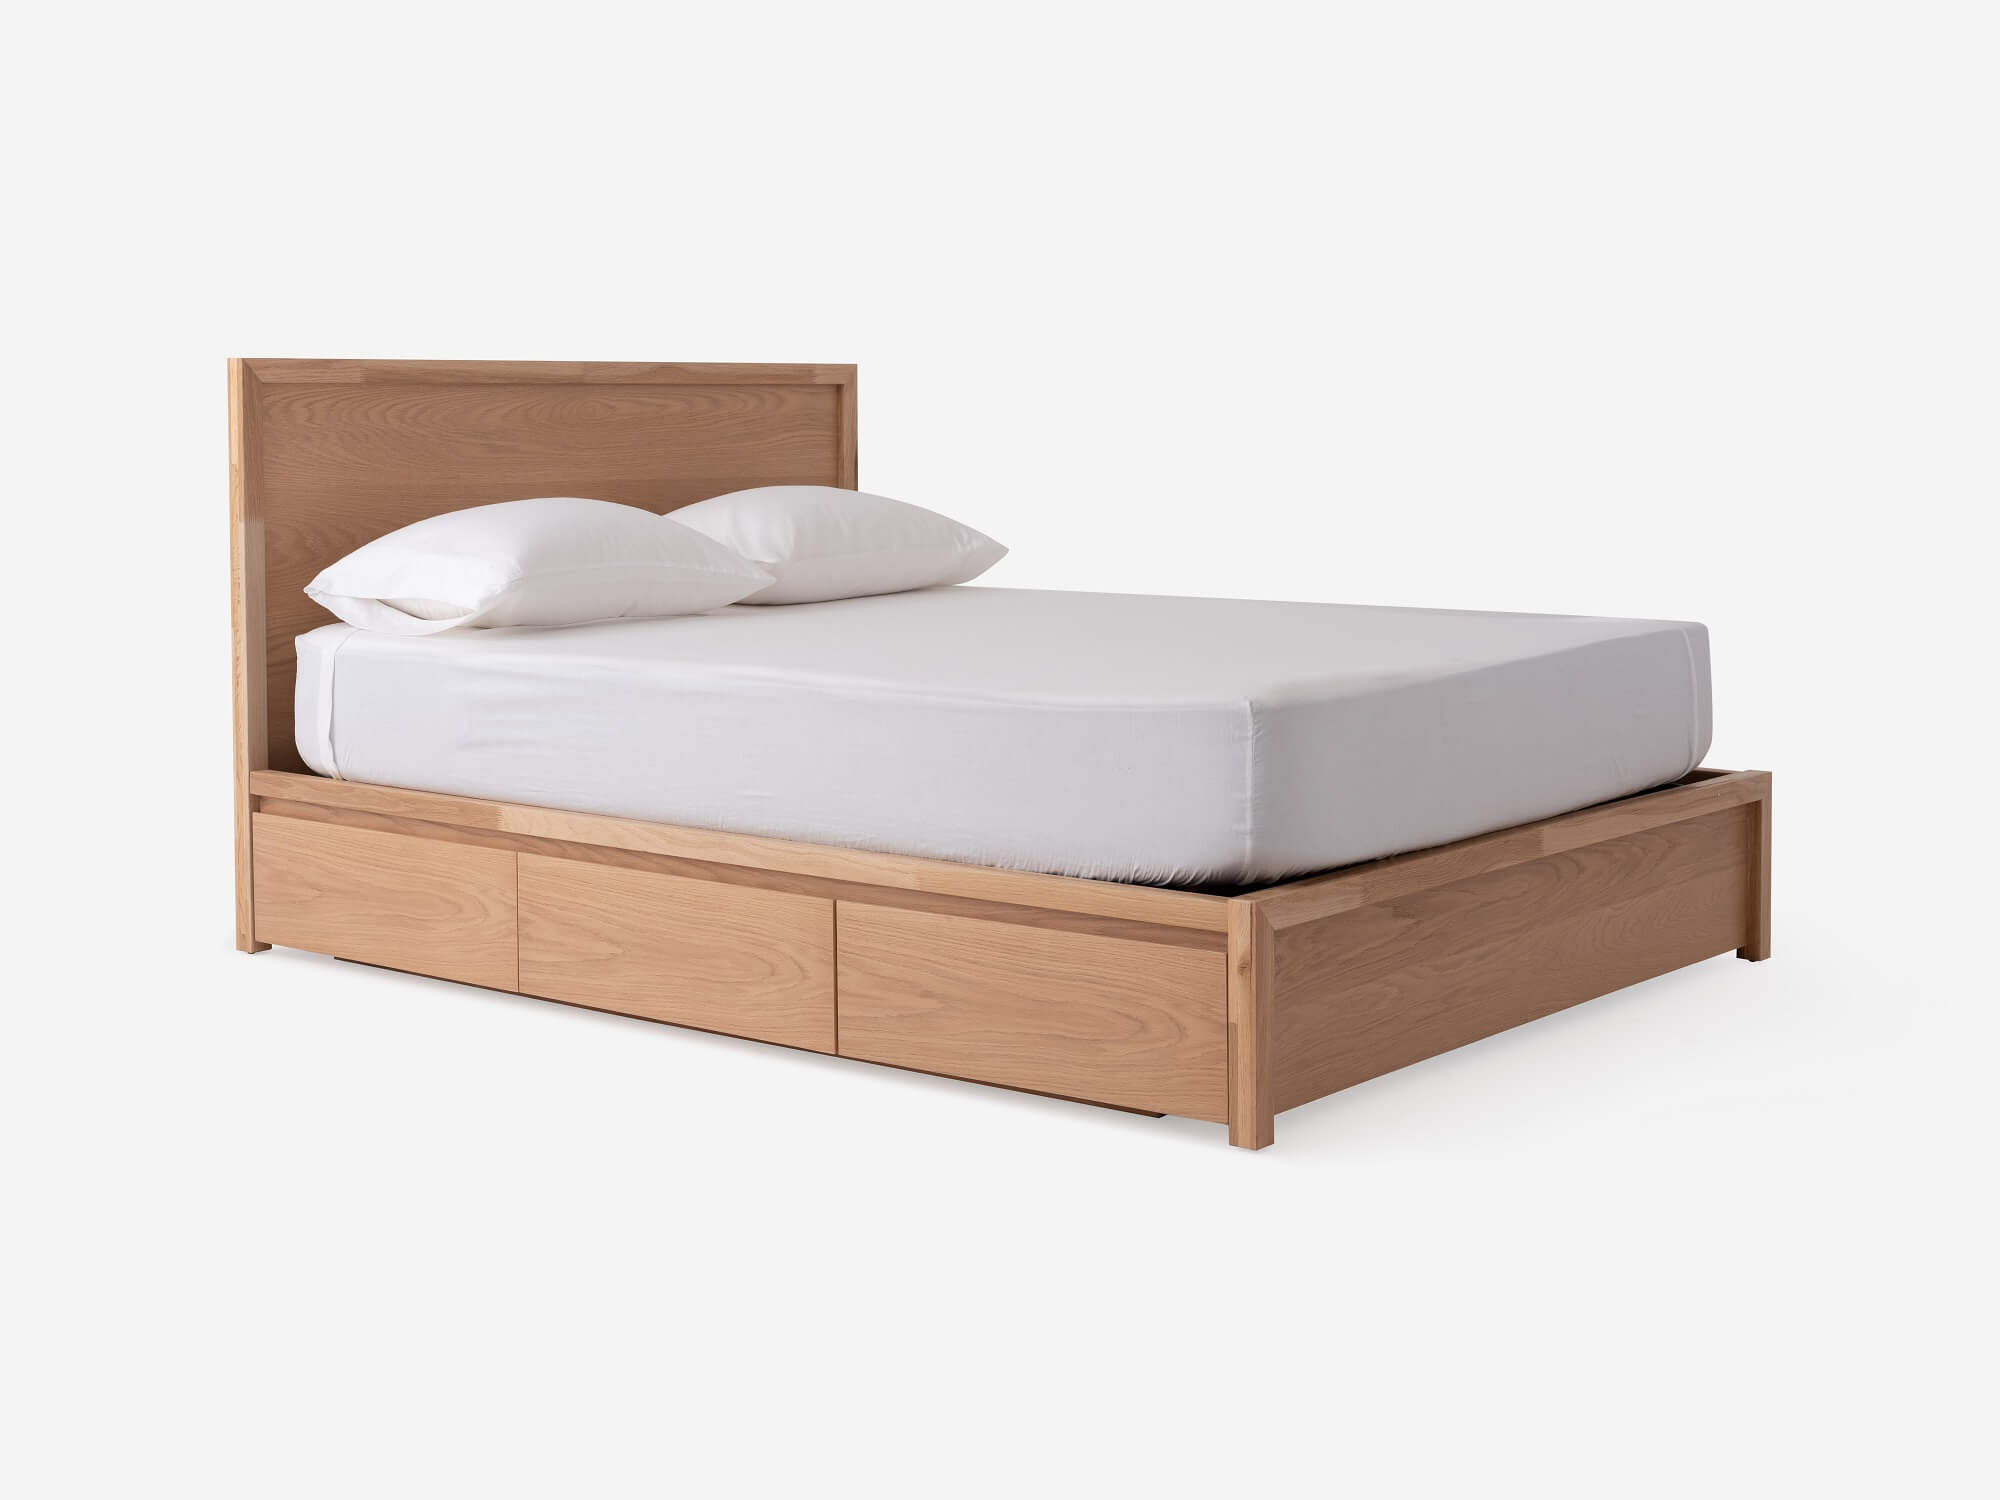 https://images.eq3.com/image-service/c988e07f-04ea-462f-a812-5c7772b1ae42/angled-view-of-marcel-drawer-storage-bed-in-oak_COMPRESSED.jpg